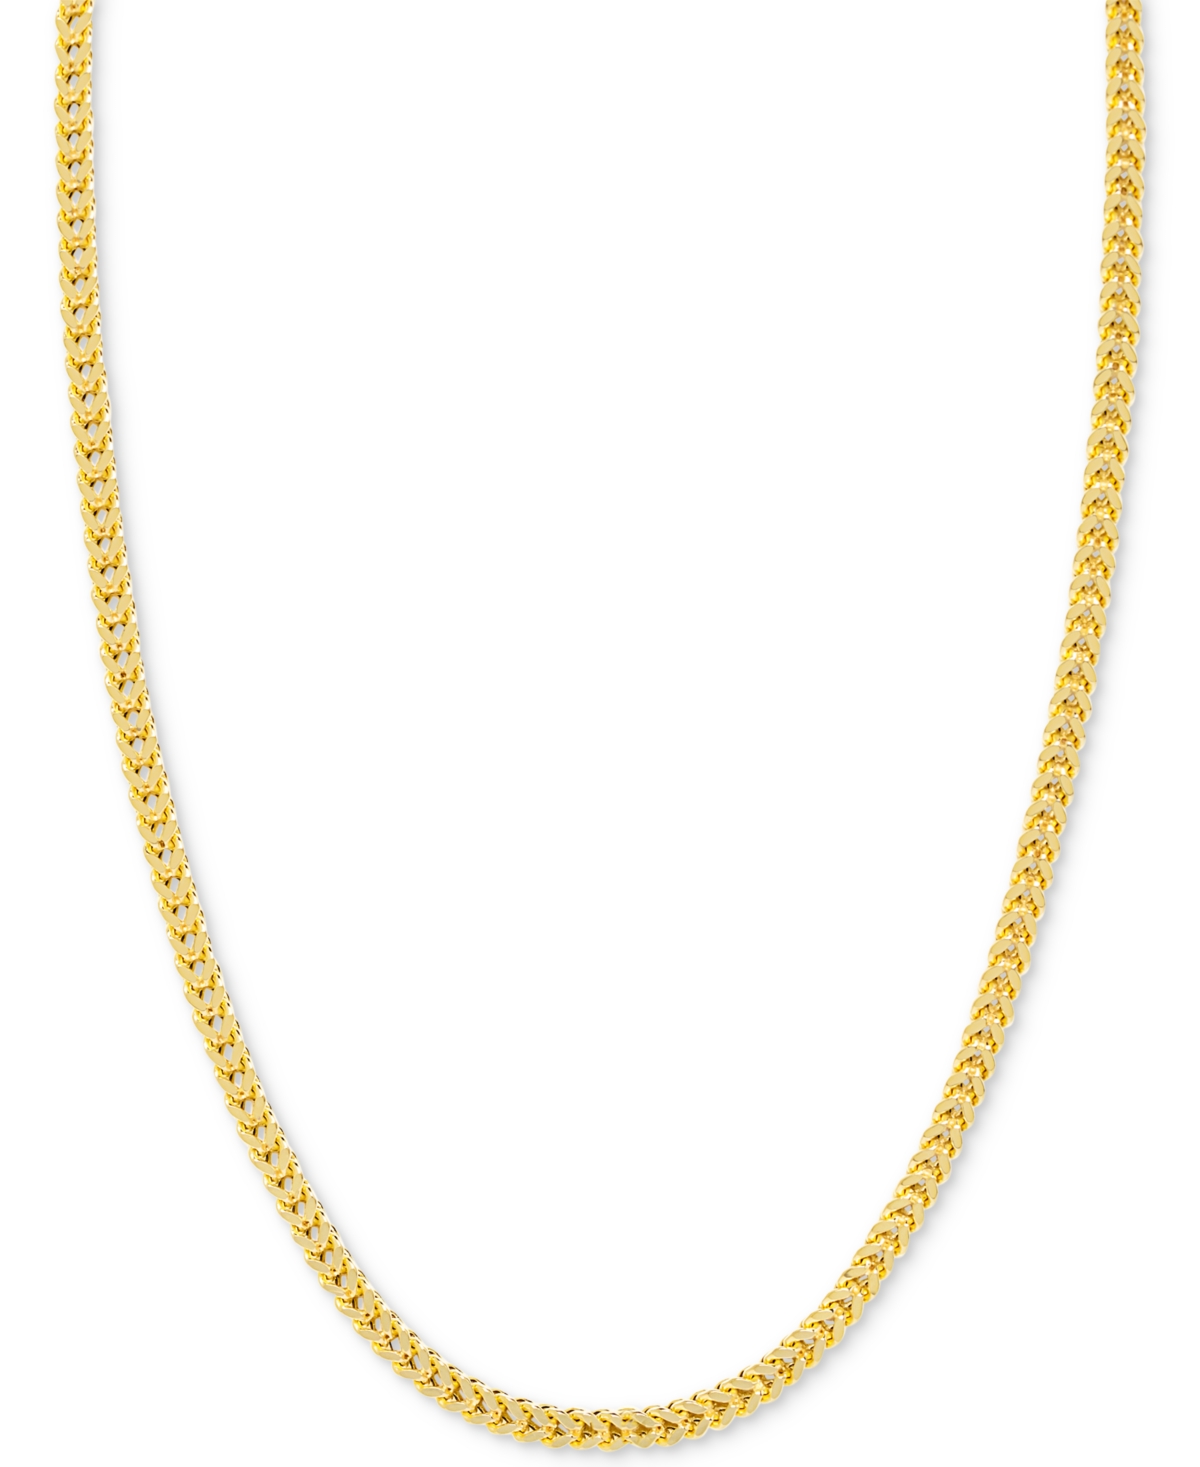 24" Franco Chain Necklace in 14k Gold - Yellow Gold